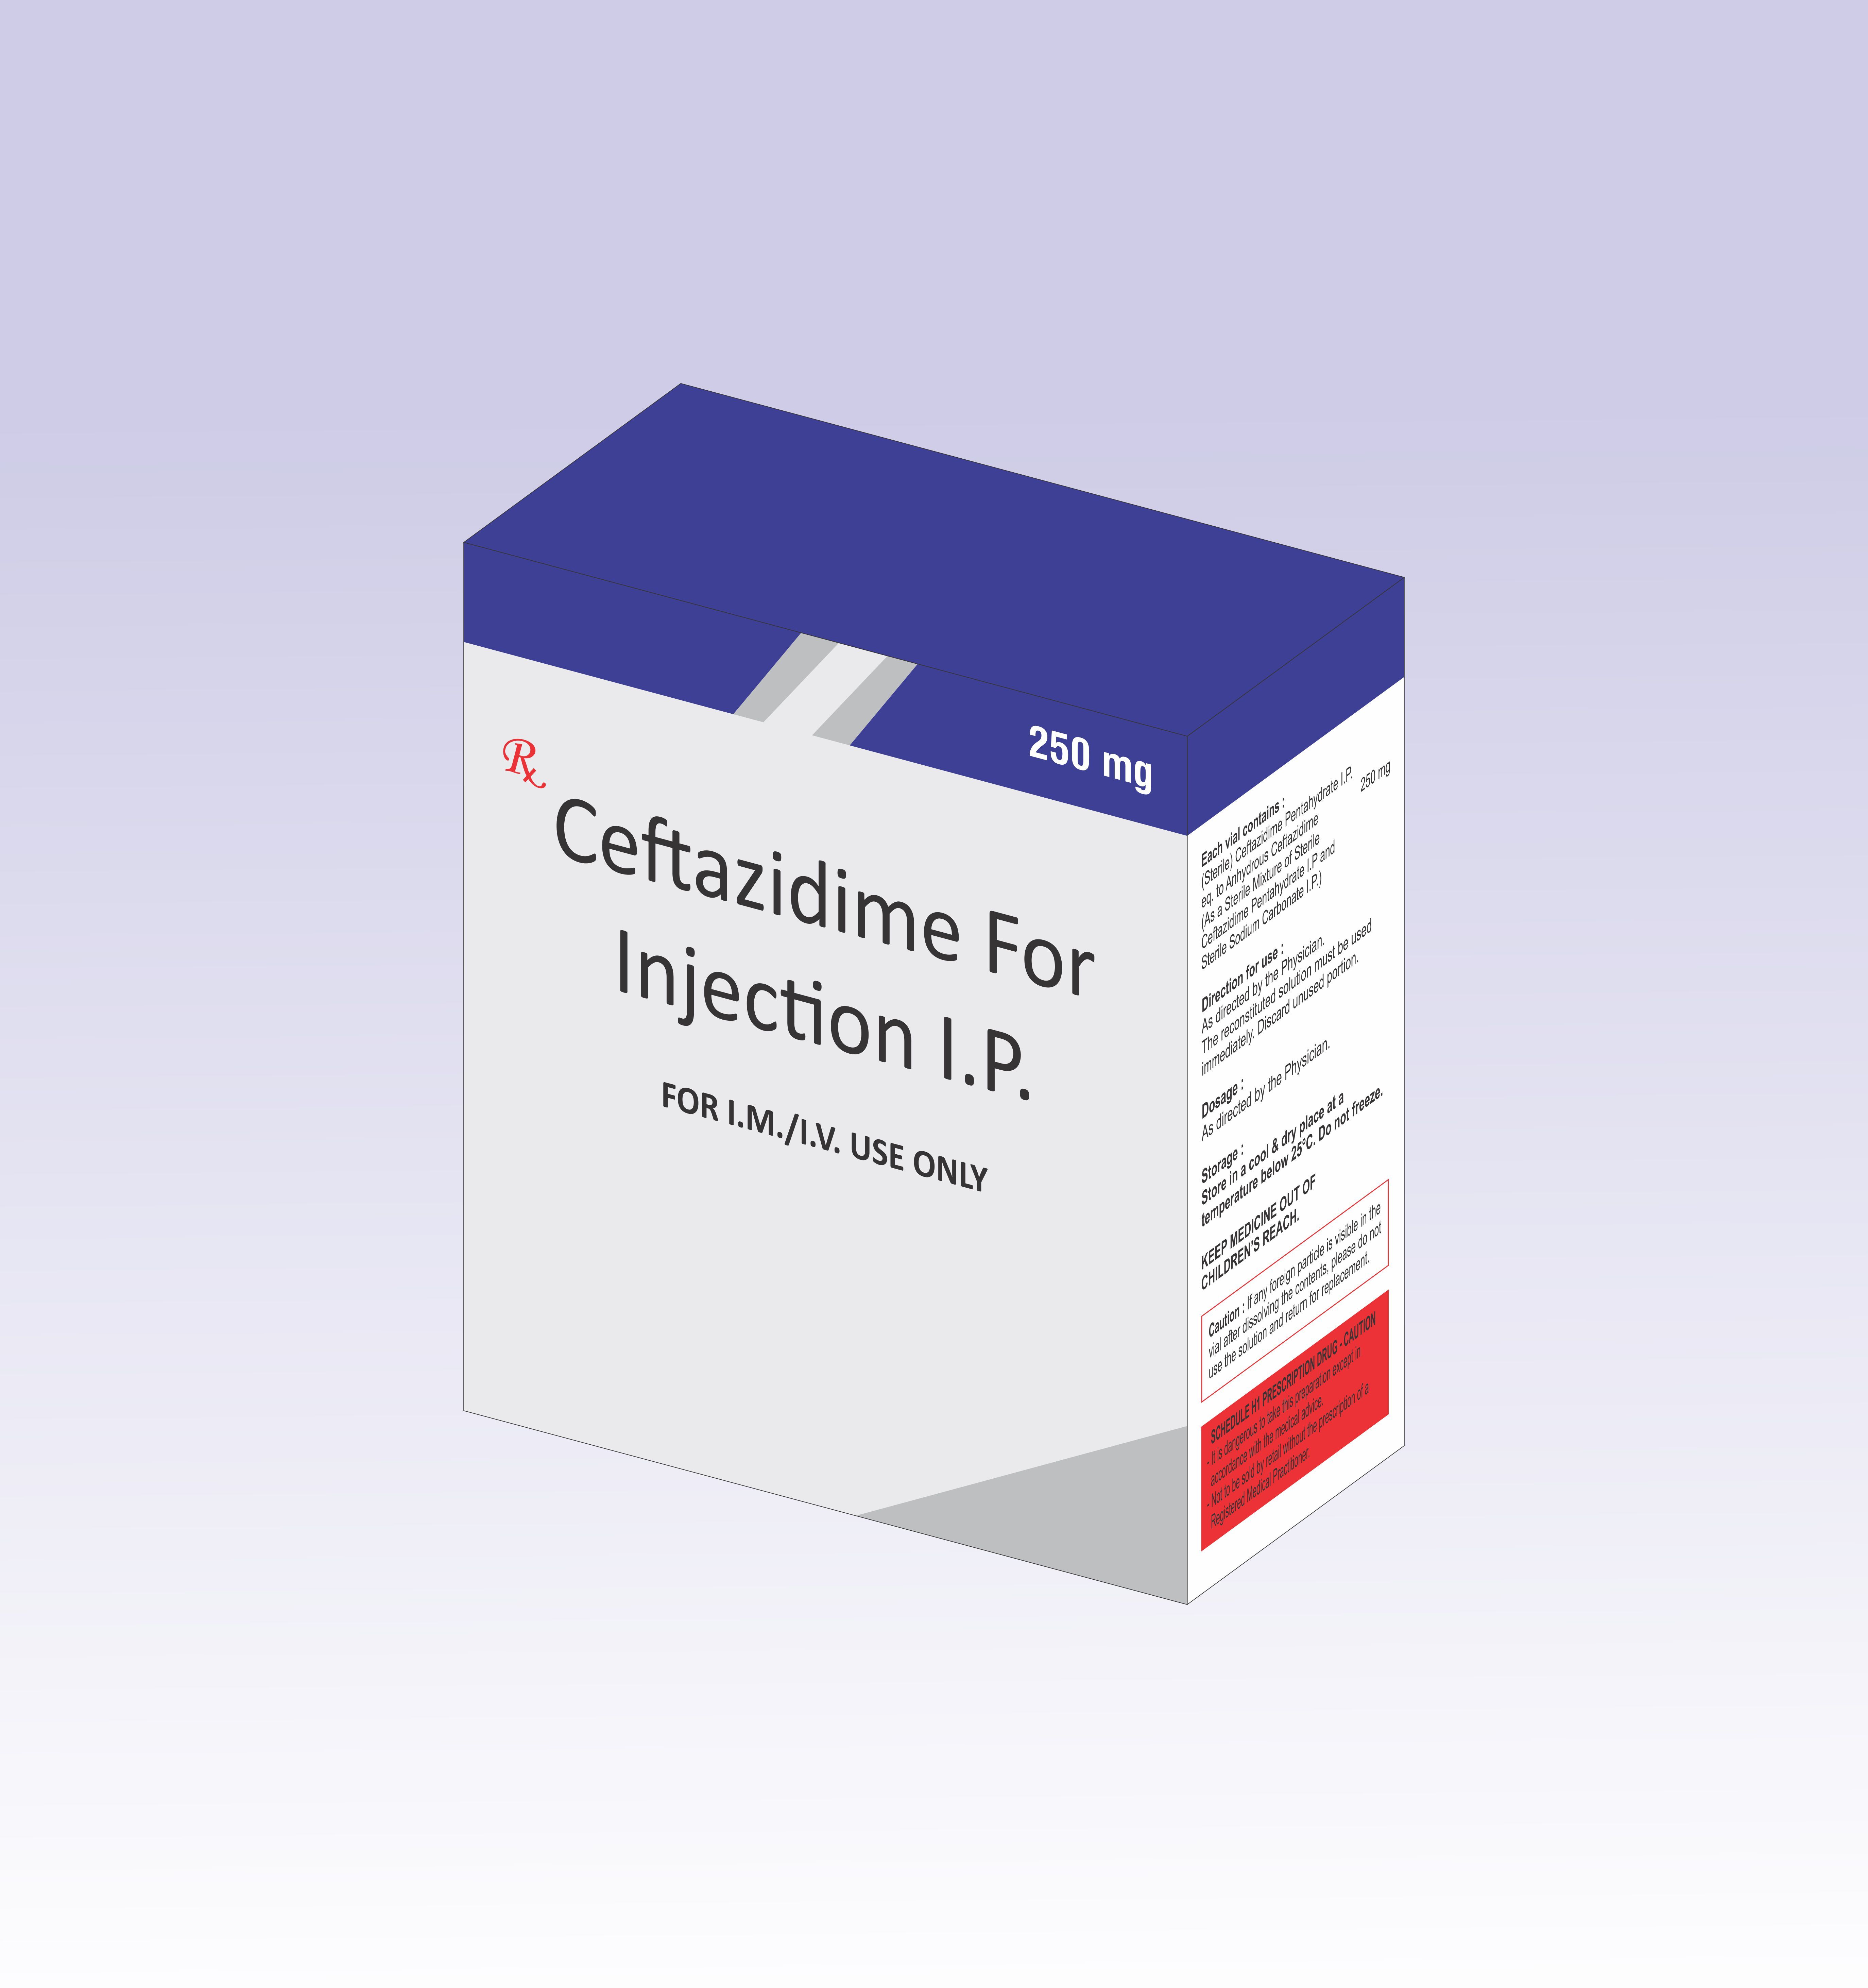 Cefoperazone with Sulbactam Injection In Third Party Manufacturing